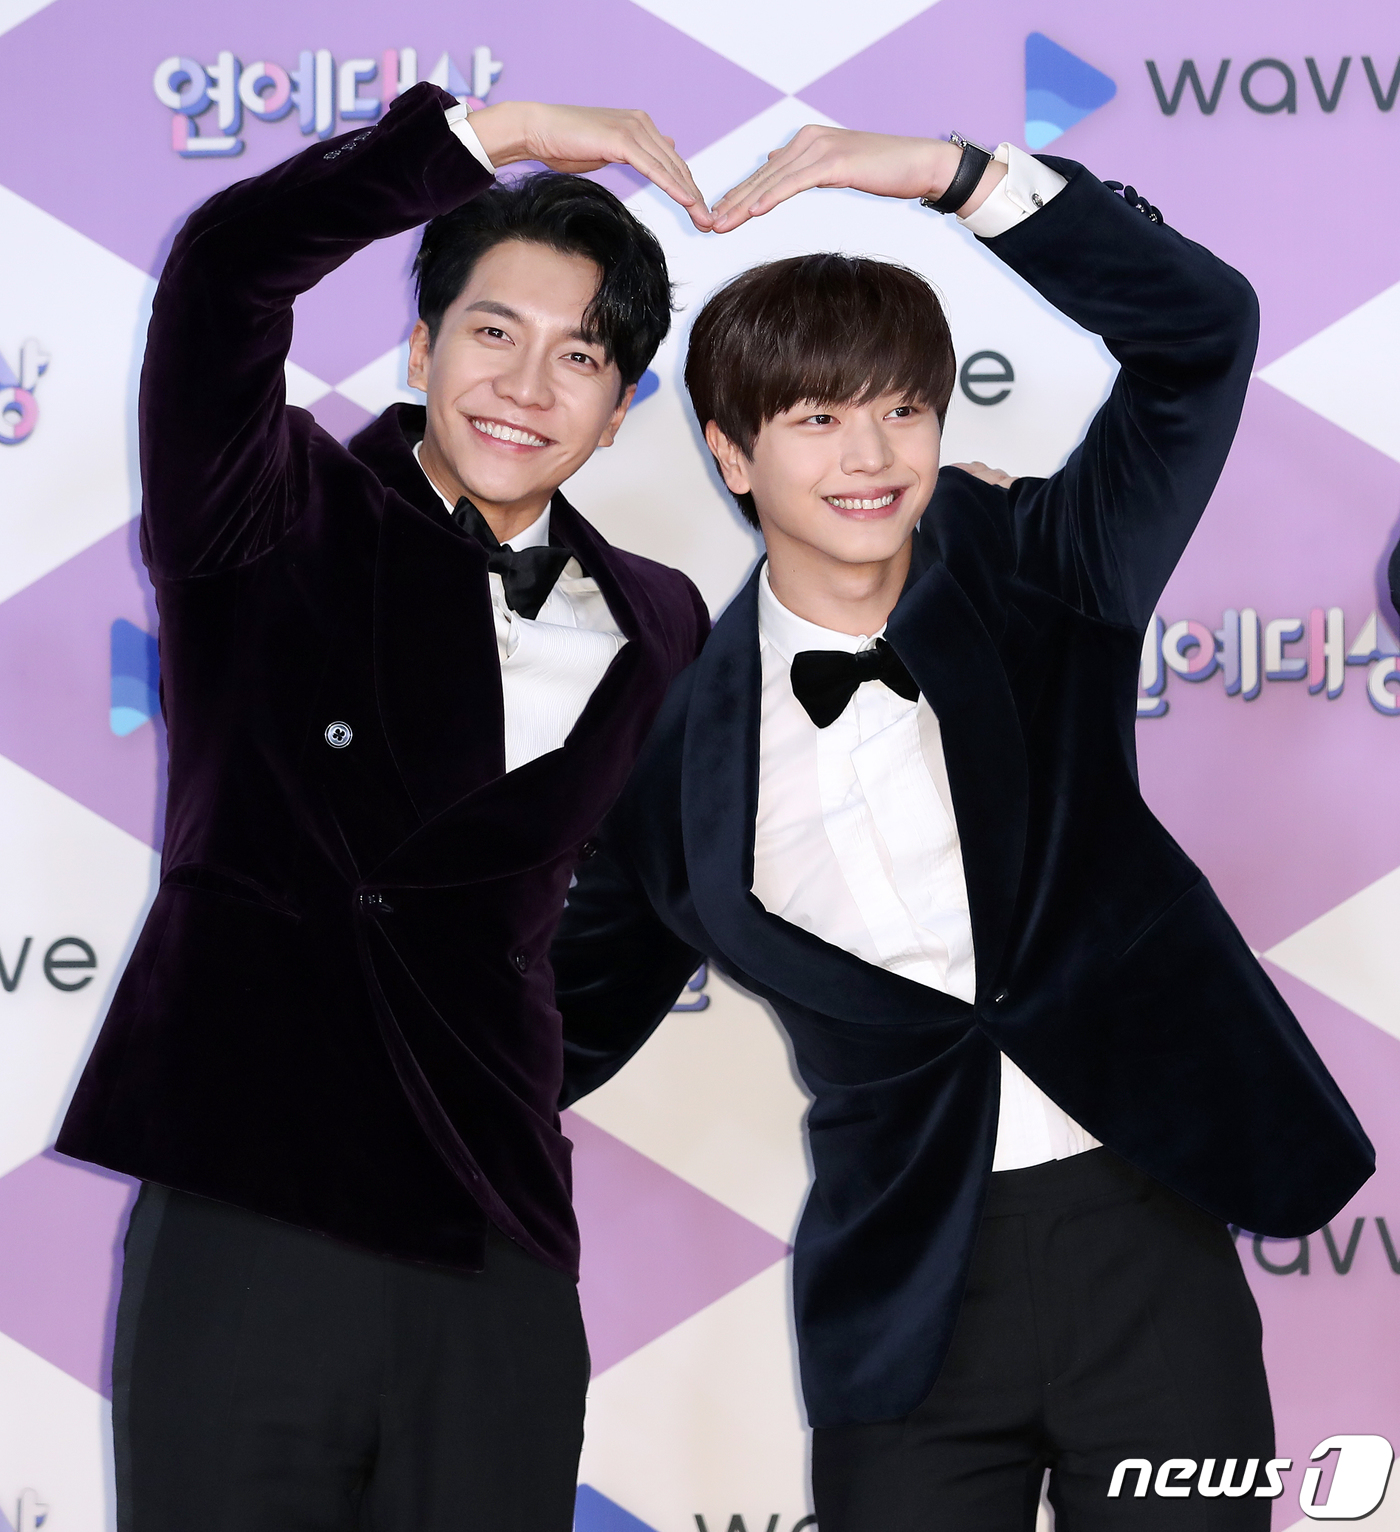 Seoul=) = Singer and actors Lee Seung-gi and BtoB Yook Sungjae (right) pose at the 2019 SBS Entertainment Awards photocall event held at SBS Prism Tower in Sangam-dong, Seoul Mapo-gu on the afternoon of the 28th.December 28, 2019